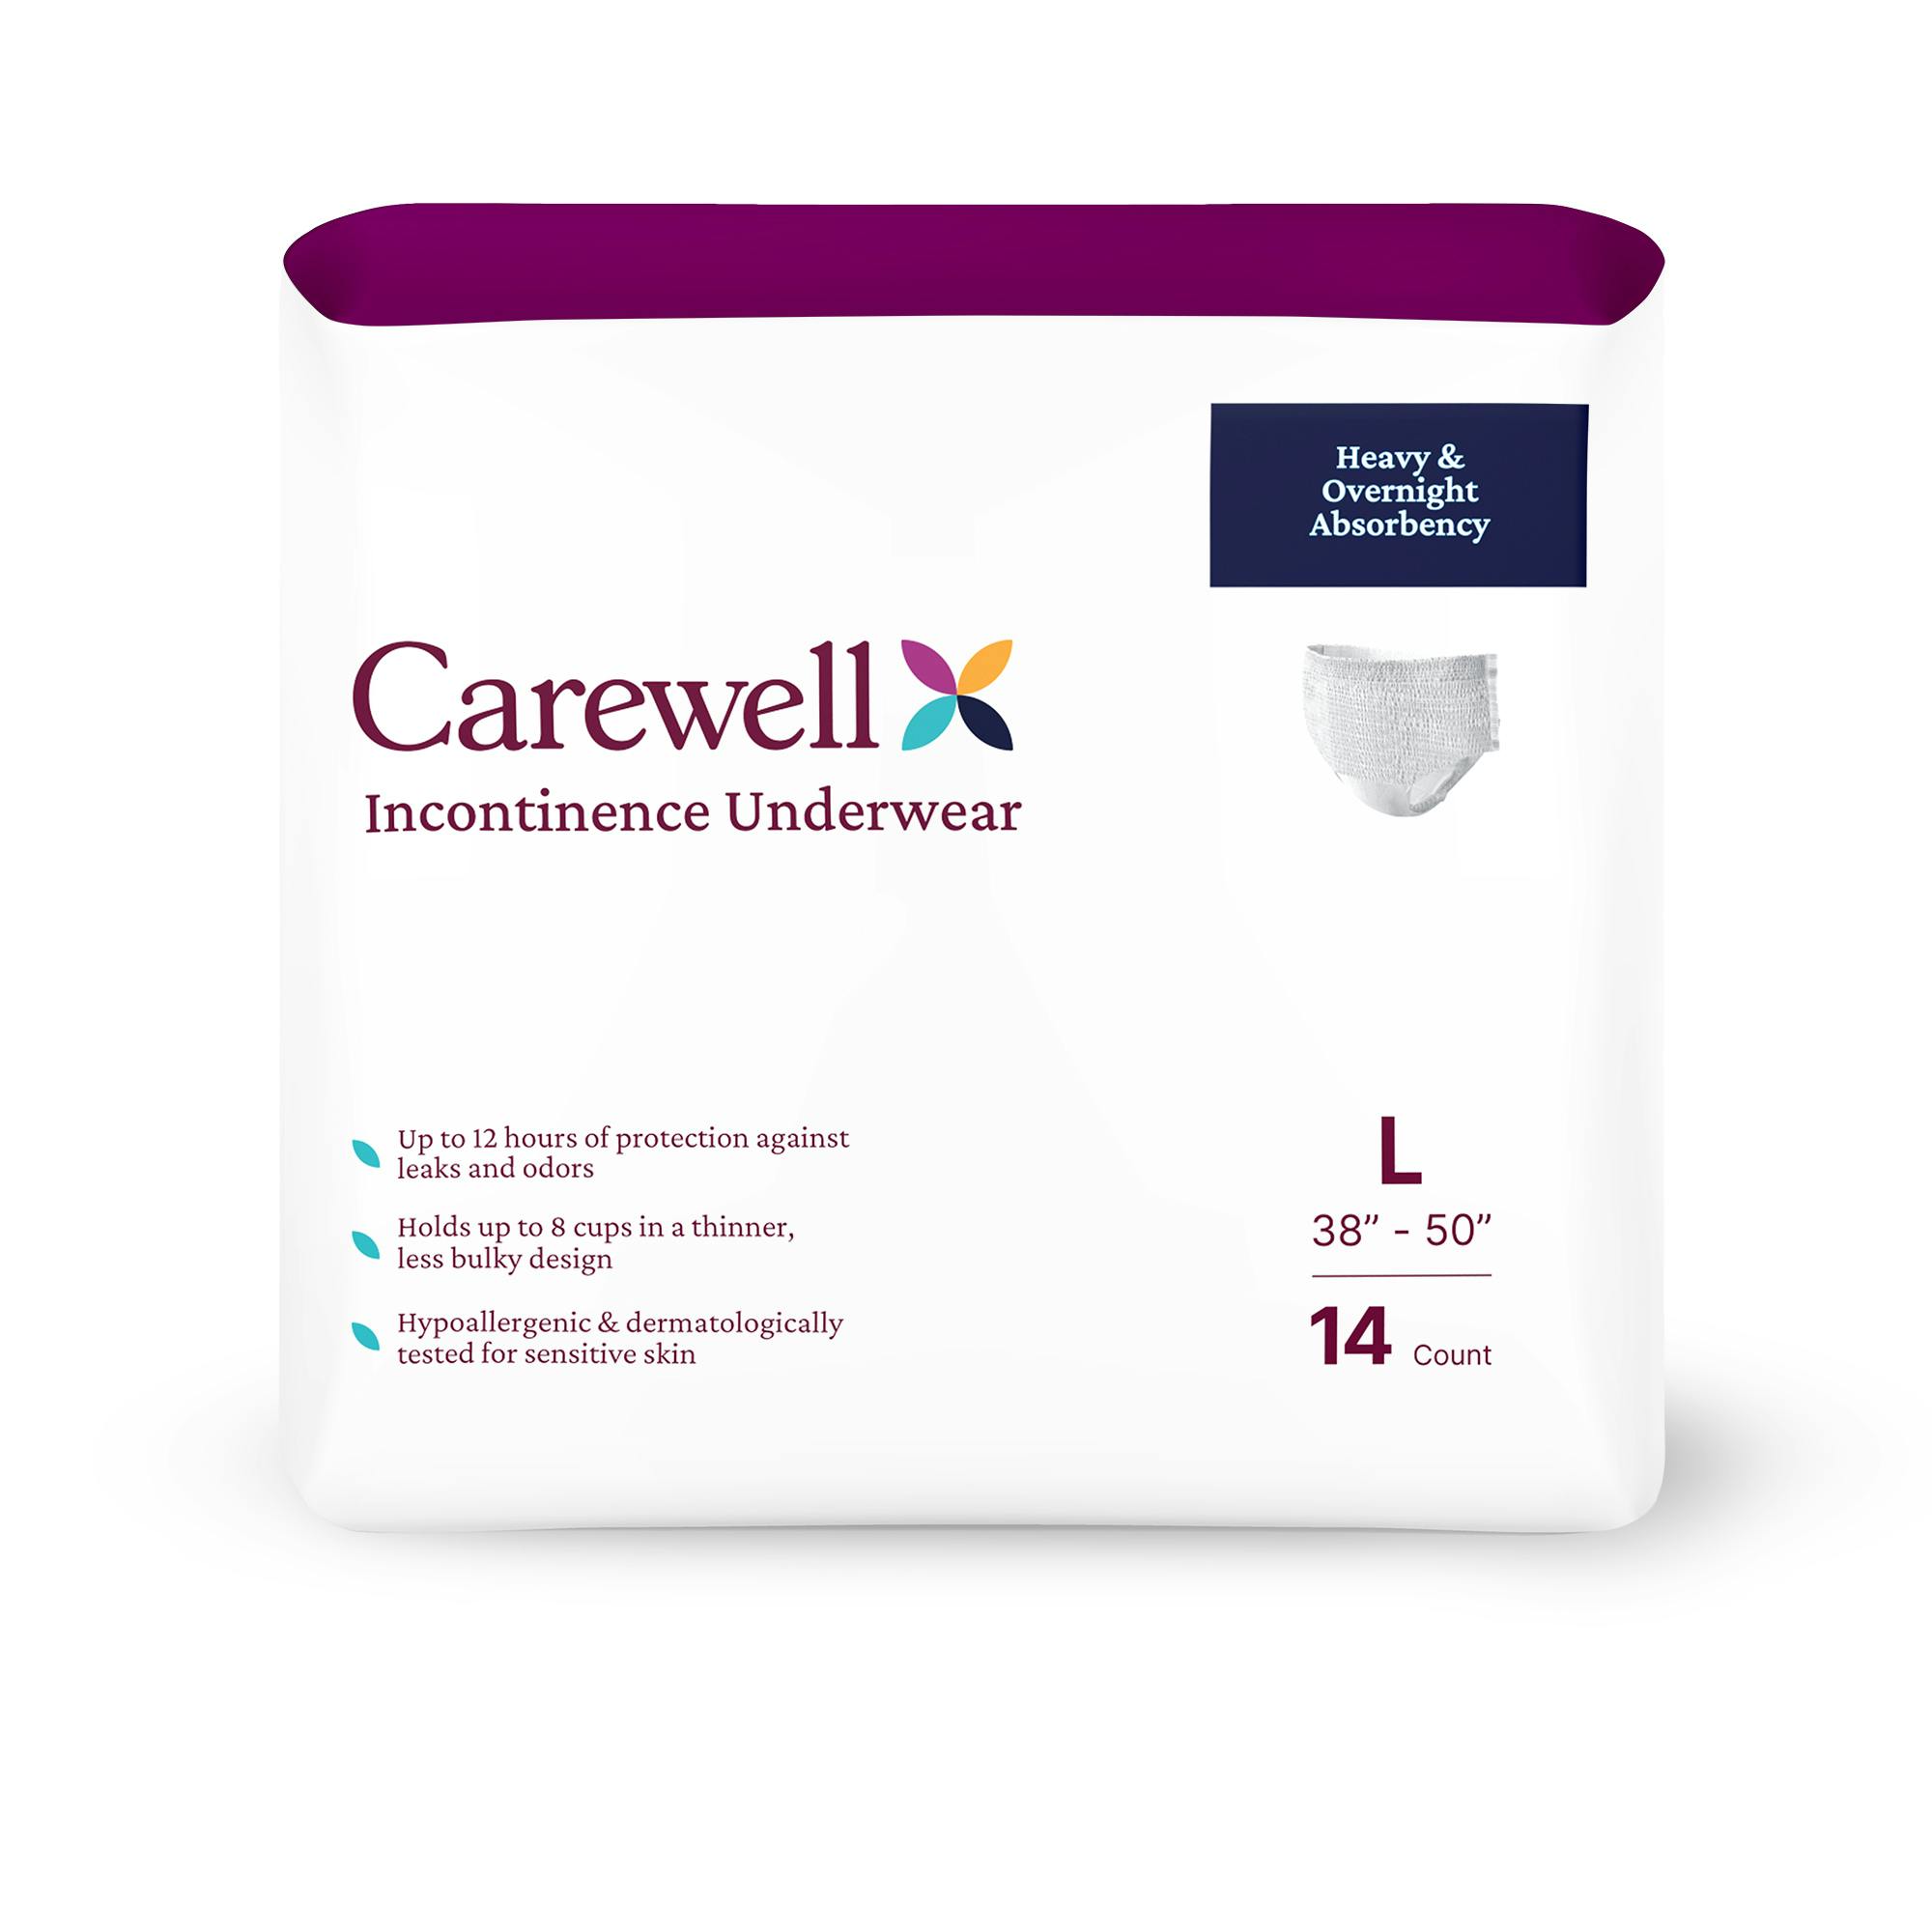 Carewell Incontinence Underwear, Heavy & Overnight Absorbency - front